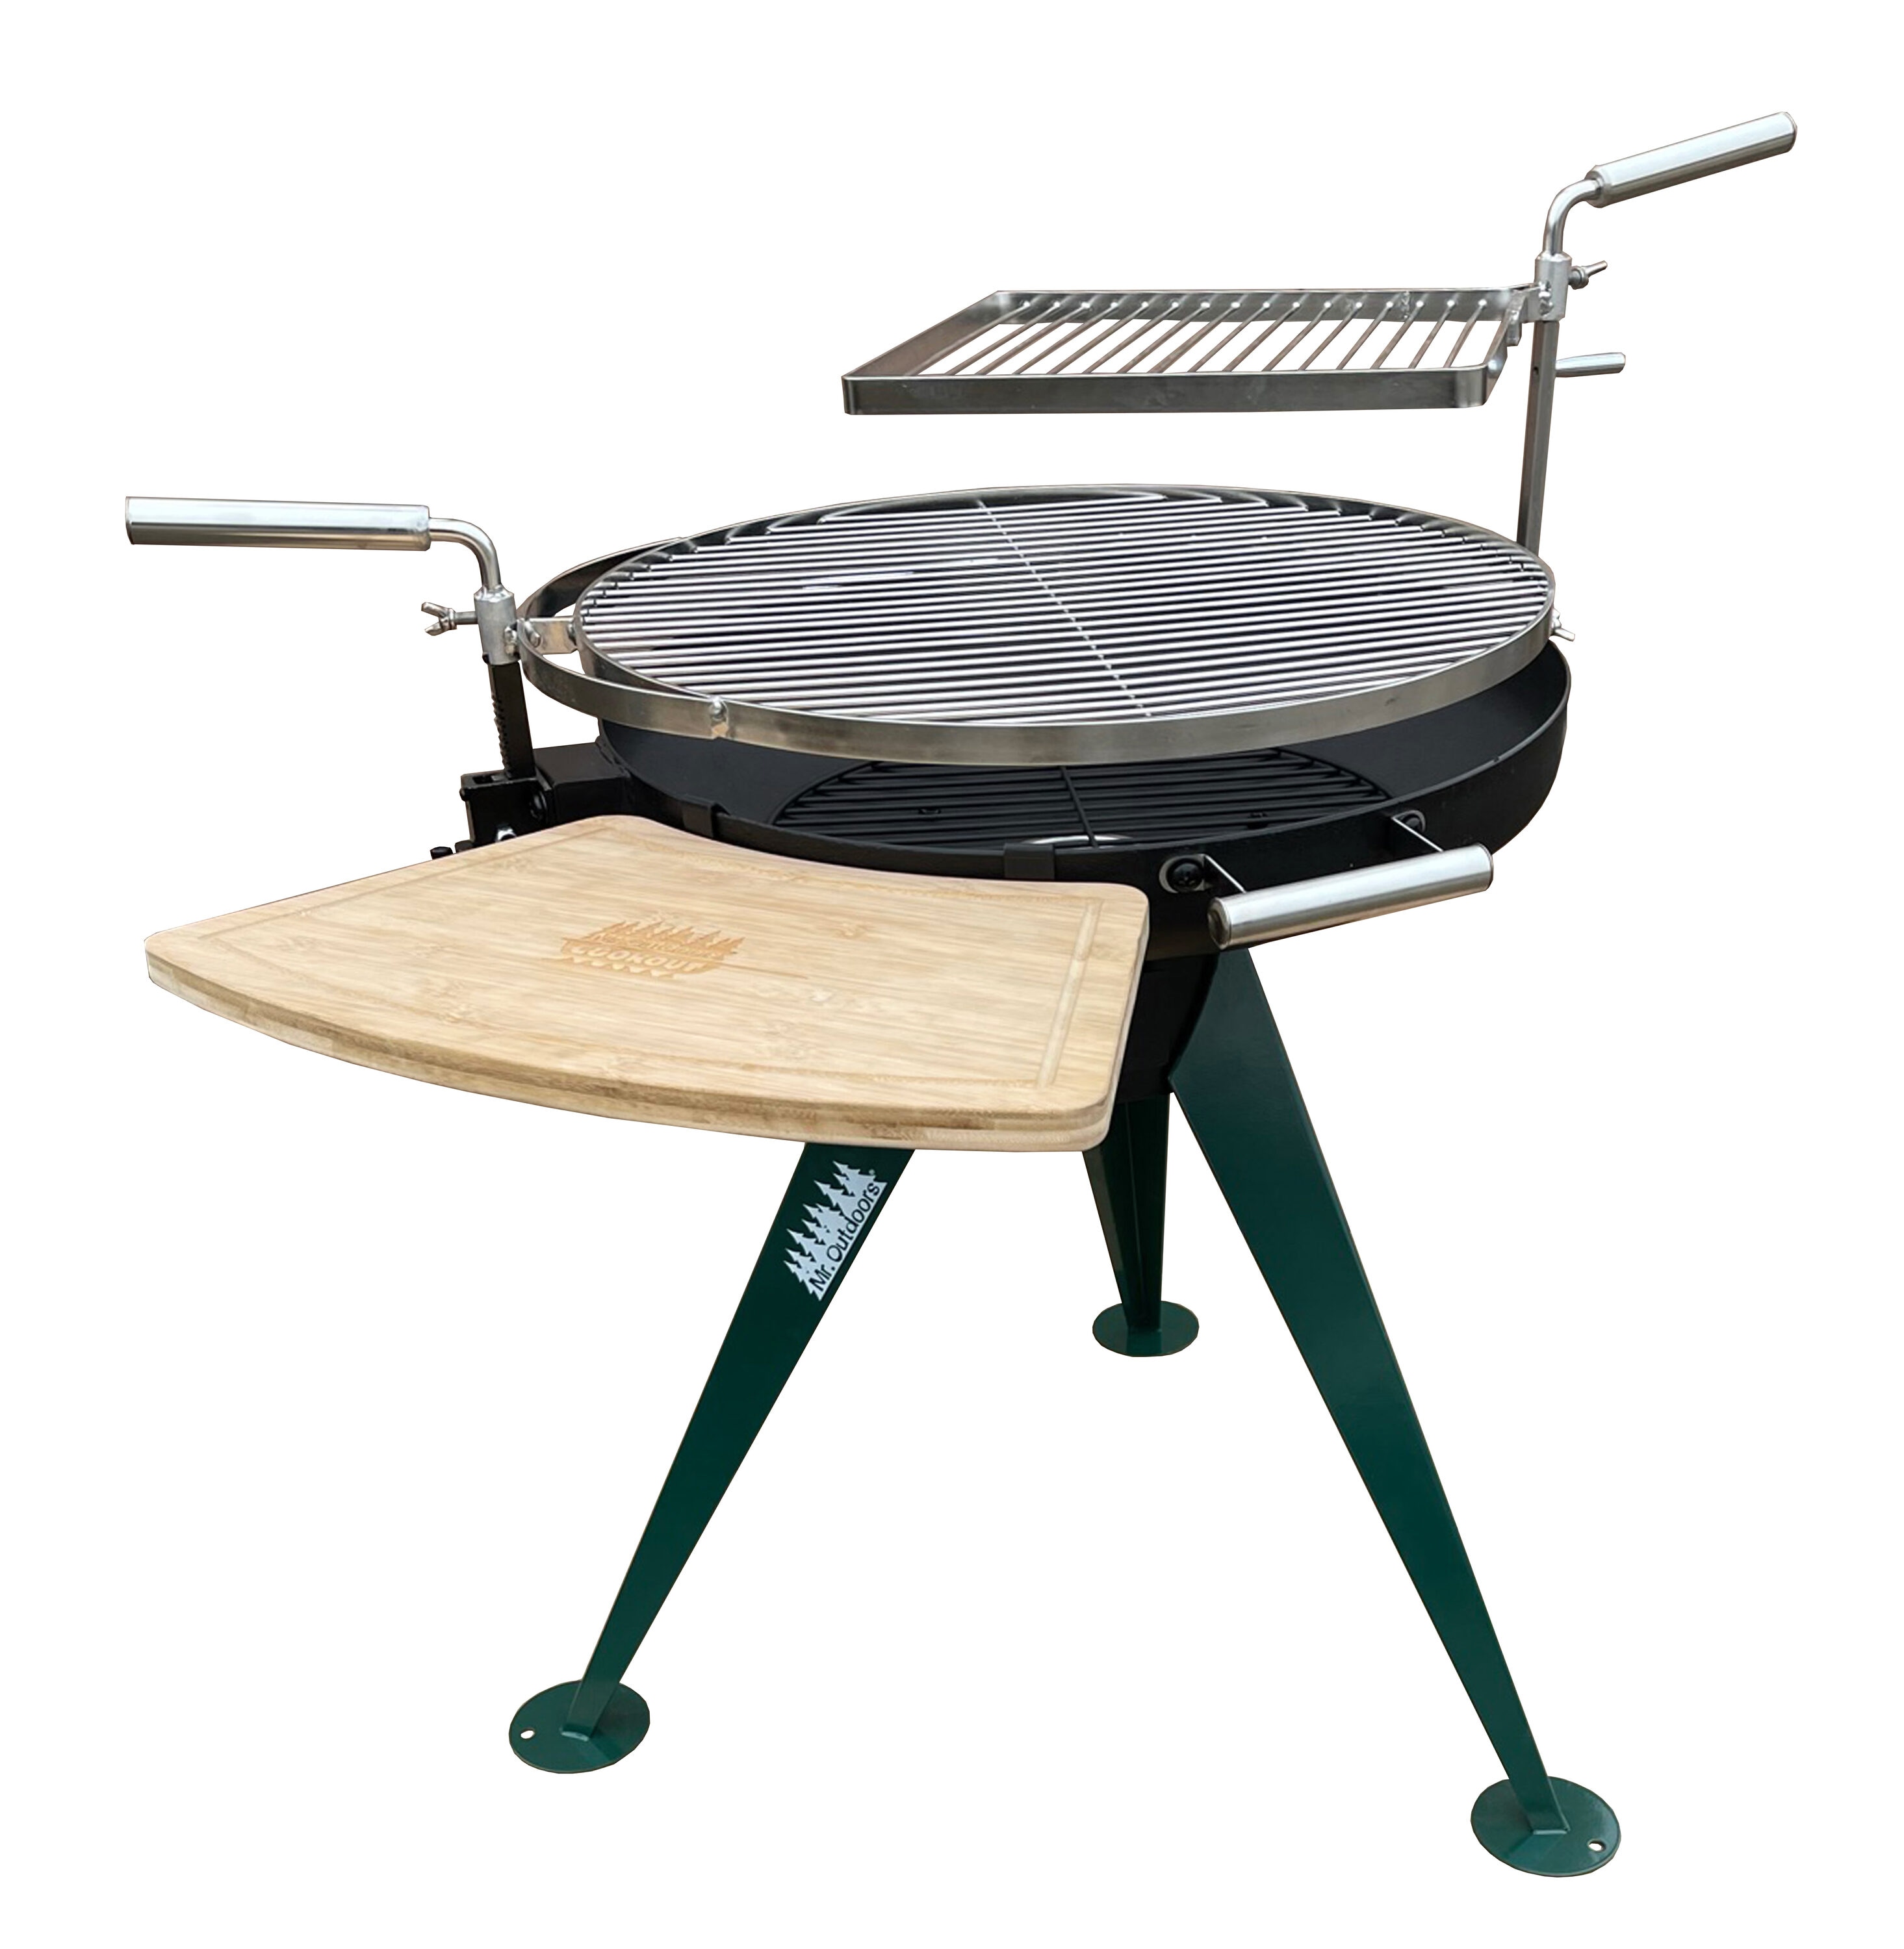 Mr. Outdoors Cookout 4pc Aluminum Camp Cook Set - Nesting Camping